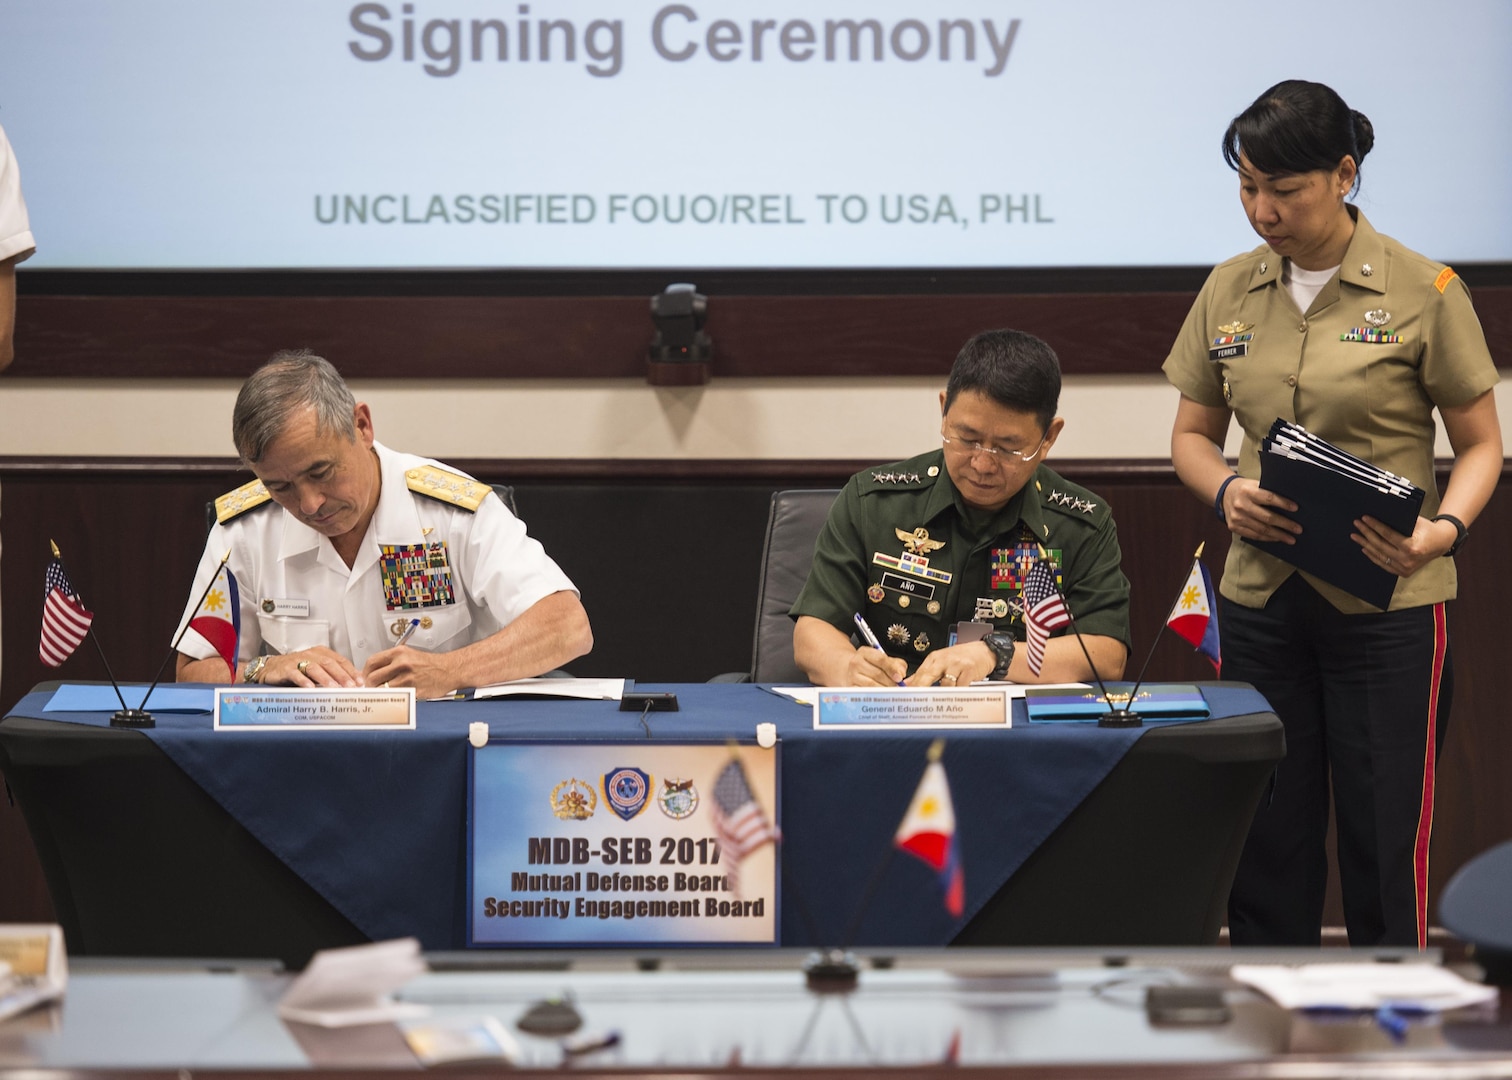 CAMP H.M. SMITH, Hawaii (Sept. 28, 2018) — Adm. Harry Harris, Commander of U.S. Pacific Command (PACOM), and Gen. Eduardo Año, Chief of Staff for the Armed Forces of the Philippines, sign paperwork for the Mutual Defense Board (MDB) and Security Engagement Board (SEB). During Año’s two-day visit to PACOM, he and Harris discussed changes to the MDB and SEB. The MDB provides direct liaison and consultation on military matters of mutual concern to develop and improve both countries’ common defense. The SEB provides the framework and mechanism for continuing liaison and consultation on non-traditional threats to security such as terrorism, transnational crimes, maritime security, and natural and man-made disasters. (U.S. Navy photo by Mass Communication Specialist 2nd Class James Mullen/Released)